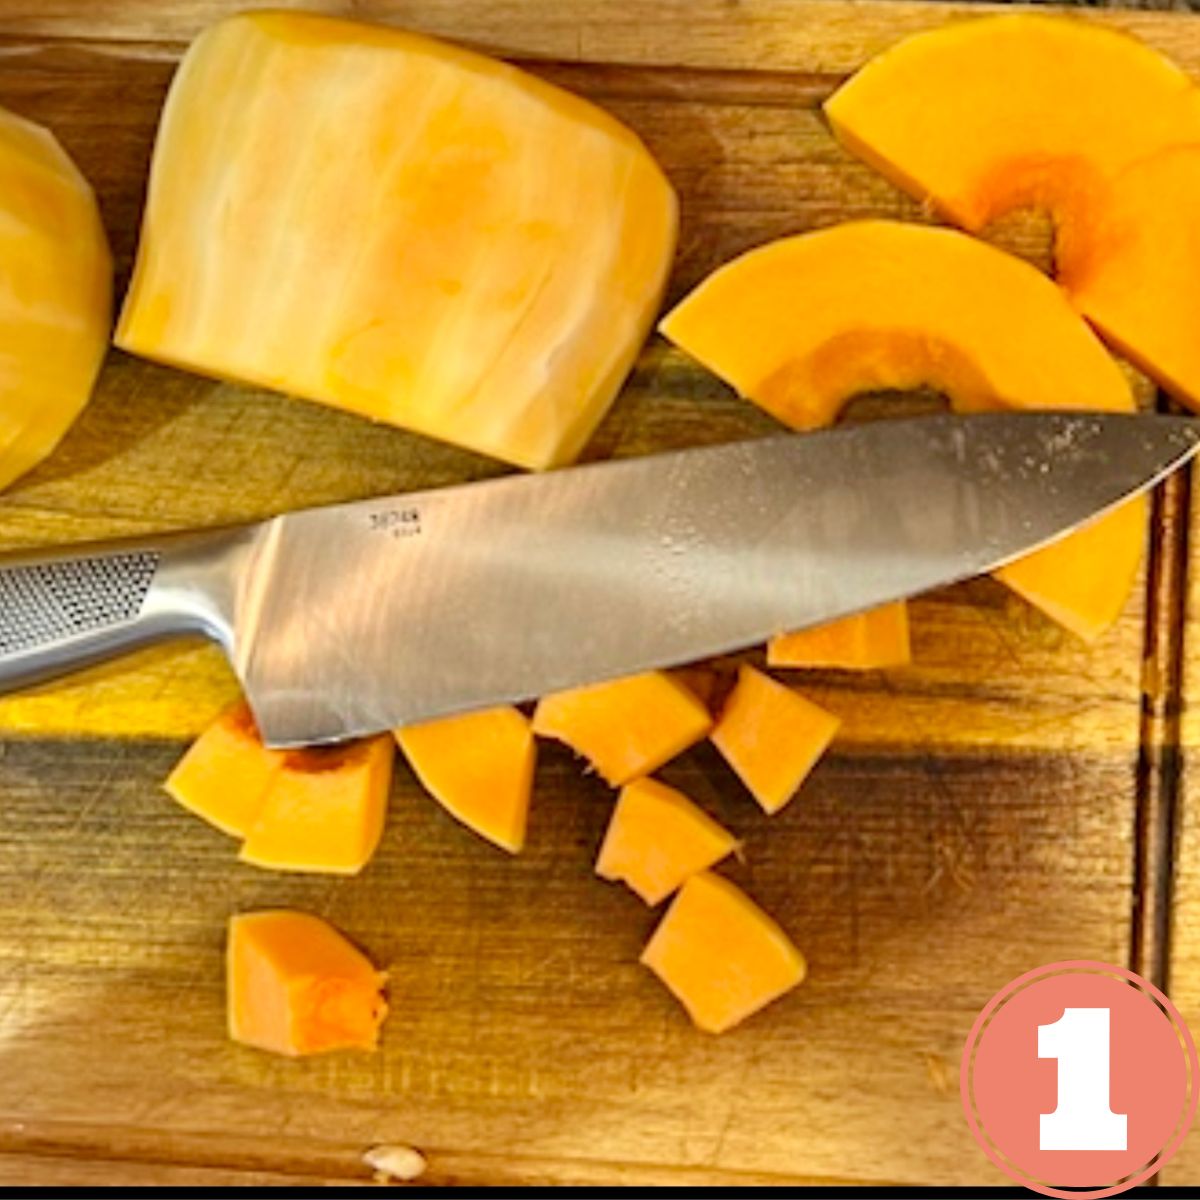 Cubed butternut squash on a wooden cutting board with a large stainless steel knife